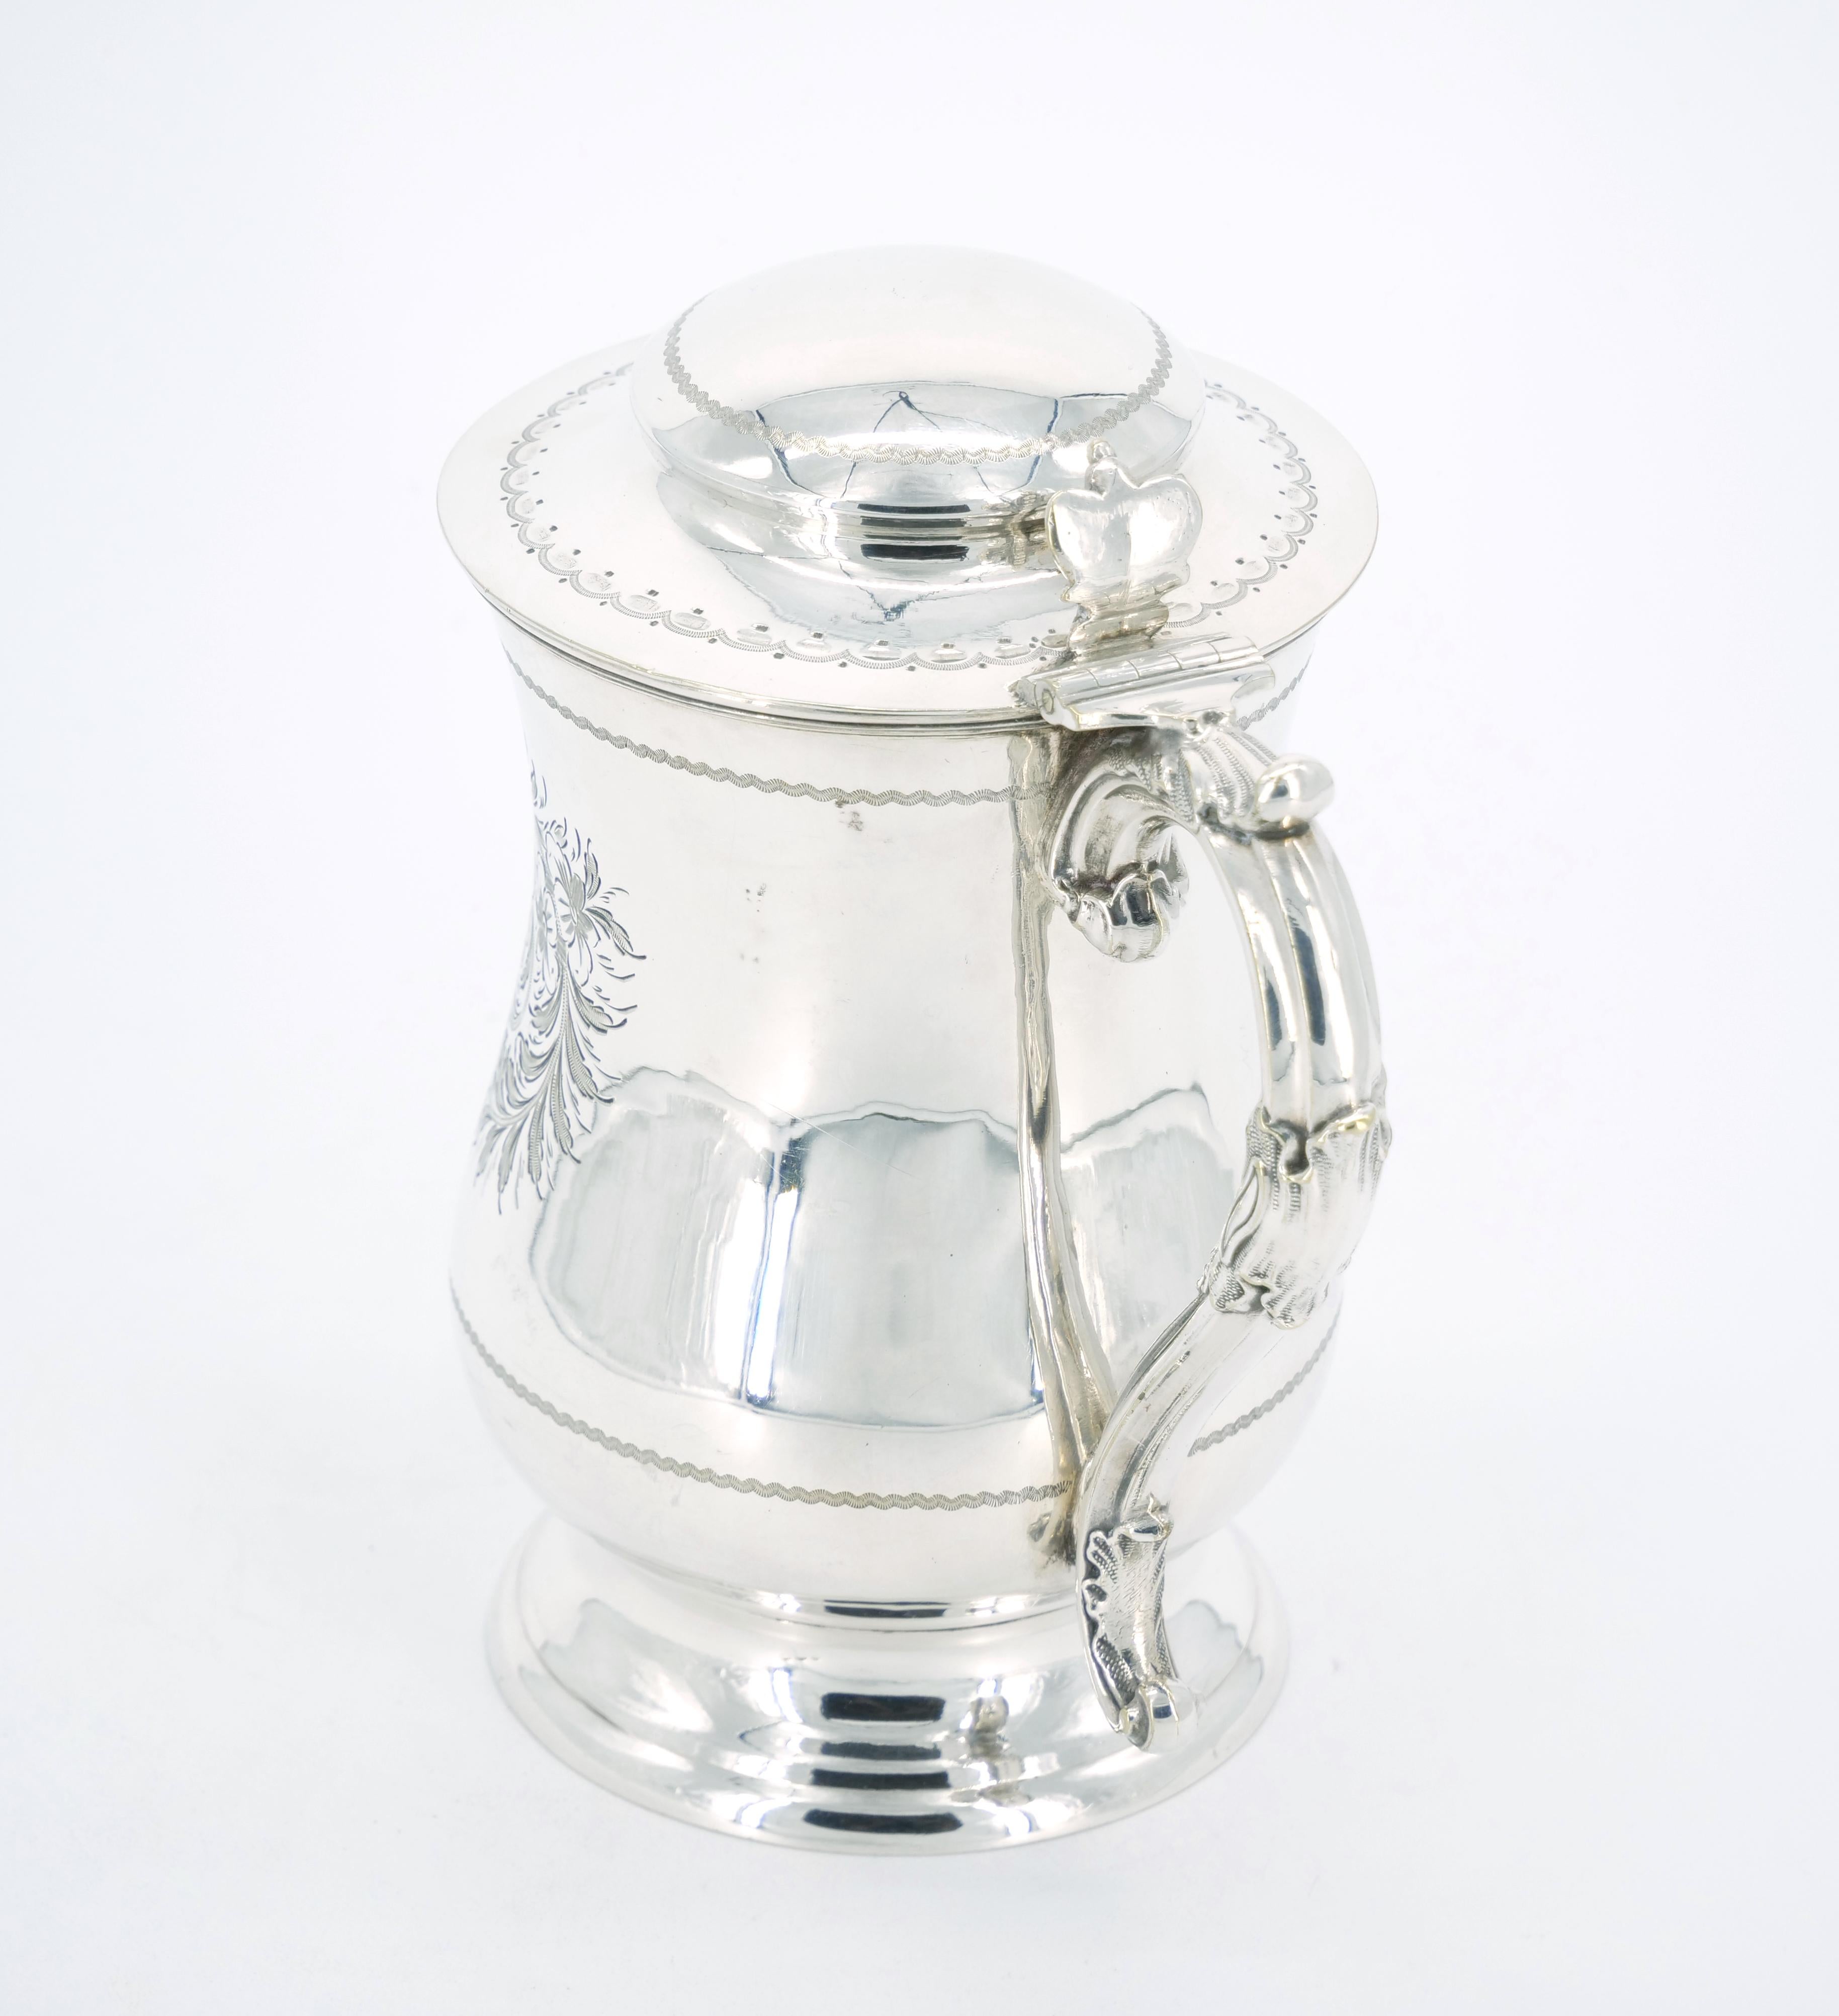 Gold English Silver Plate Engraved Exterior Queen Anne Tankard For Sale